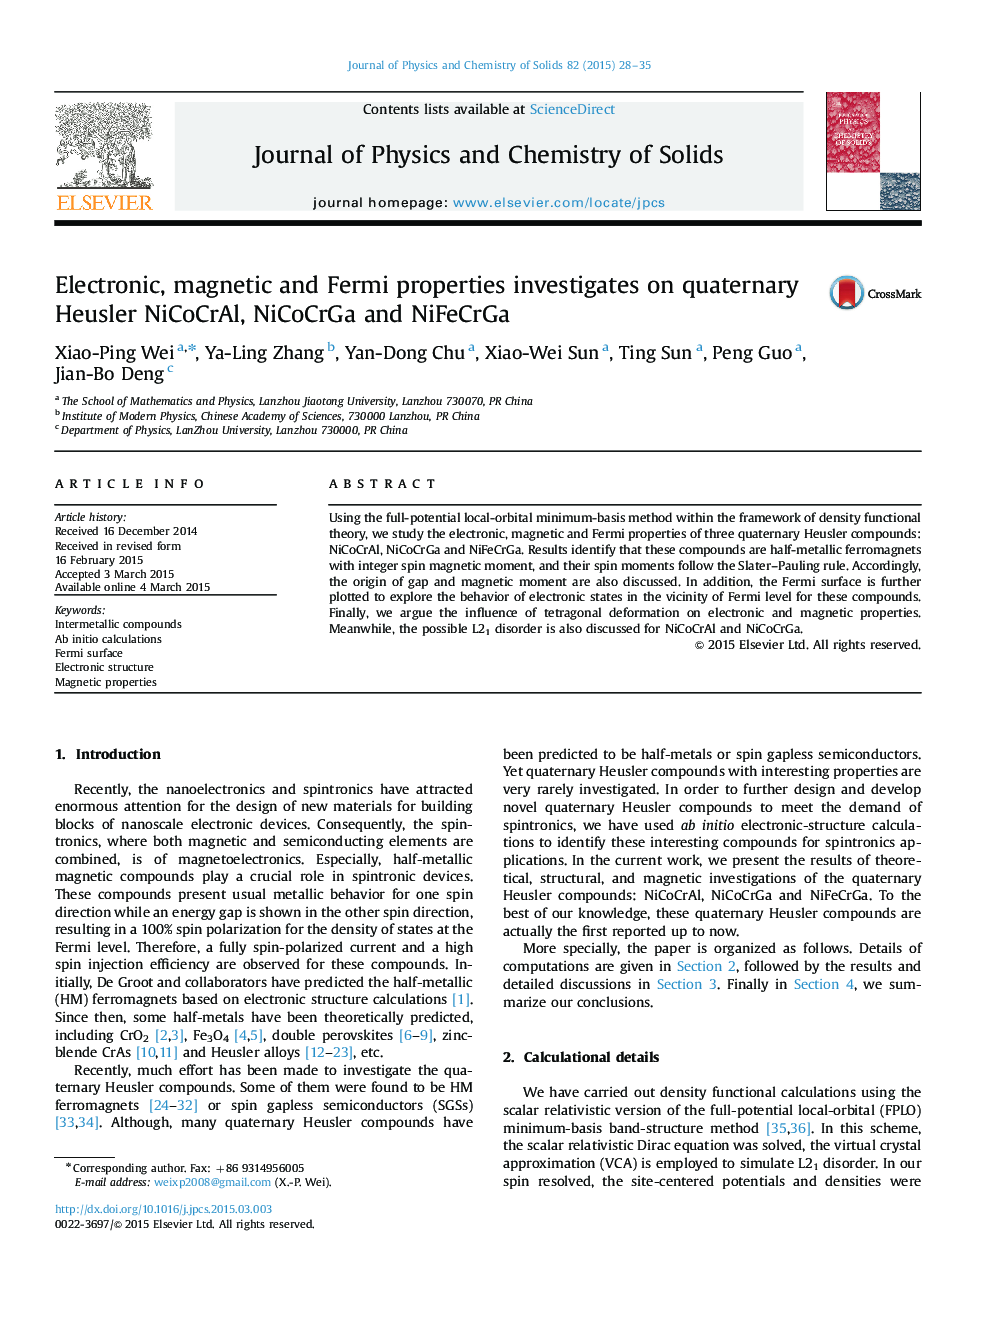 Electronic, magnetic and Fermi properties investigates on quaternary Heusler NiCoCrAl, NiCoCrGa and NiFeCrGa